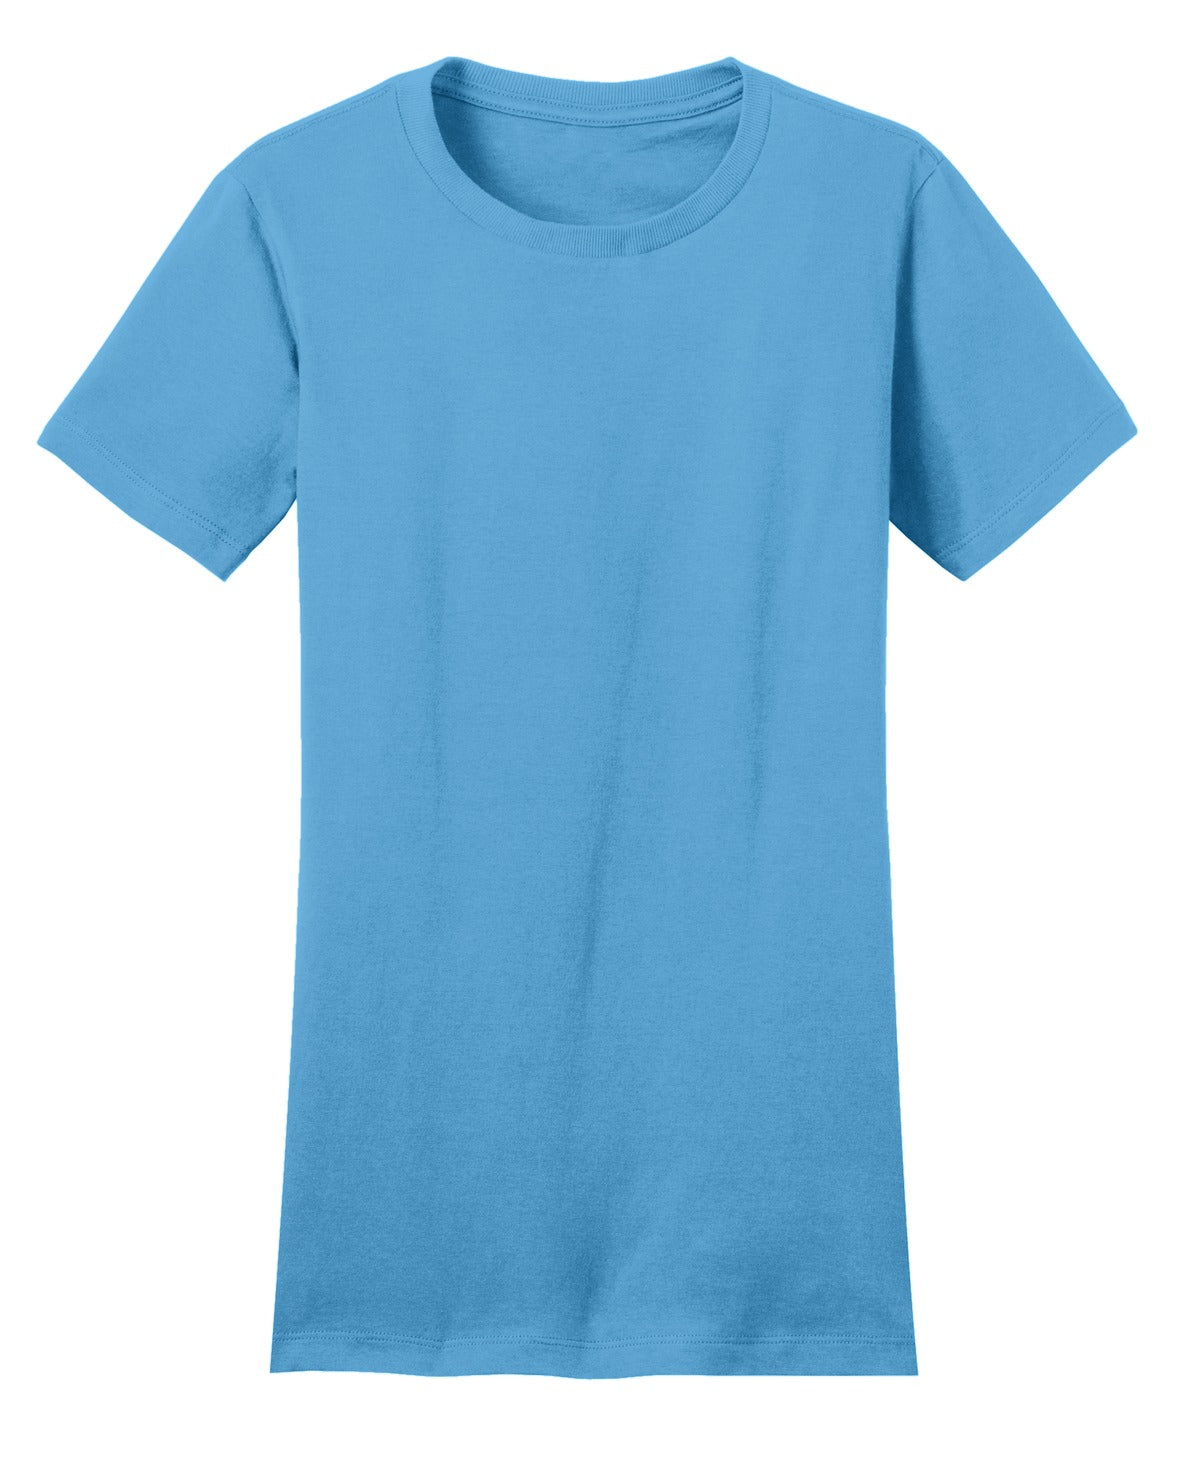 District Women's Fitted The Concert Tee DT5001 - Aquatic Blue